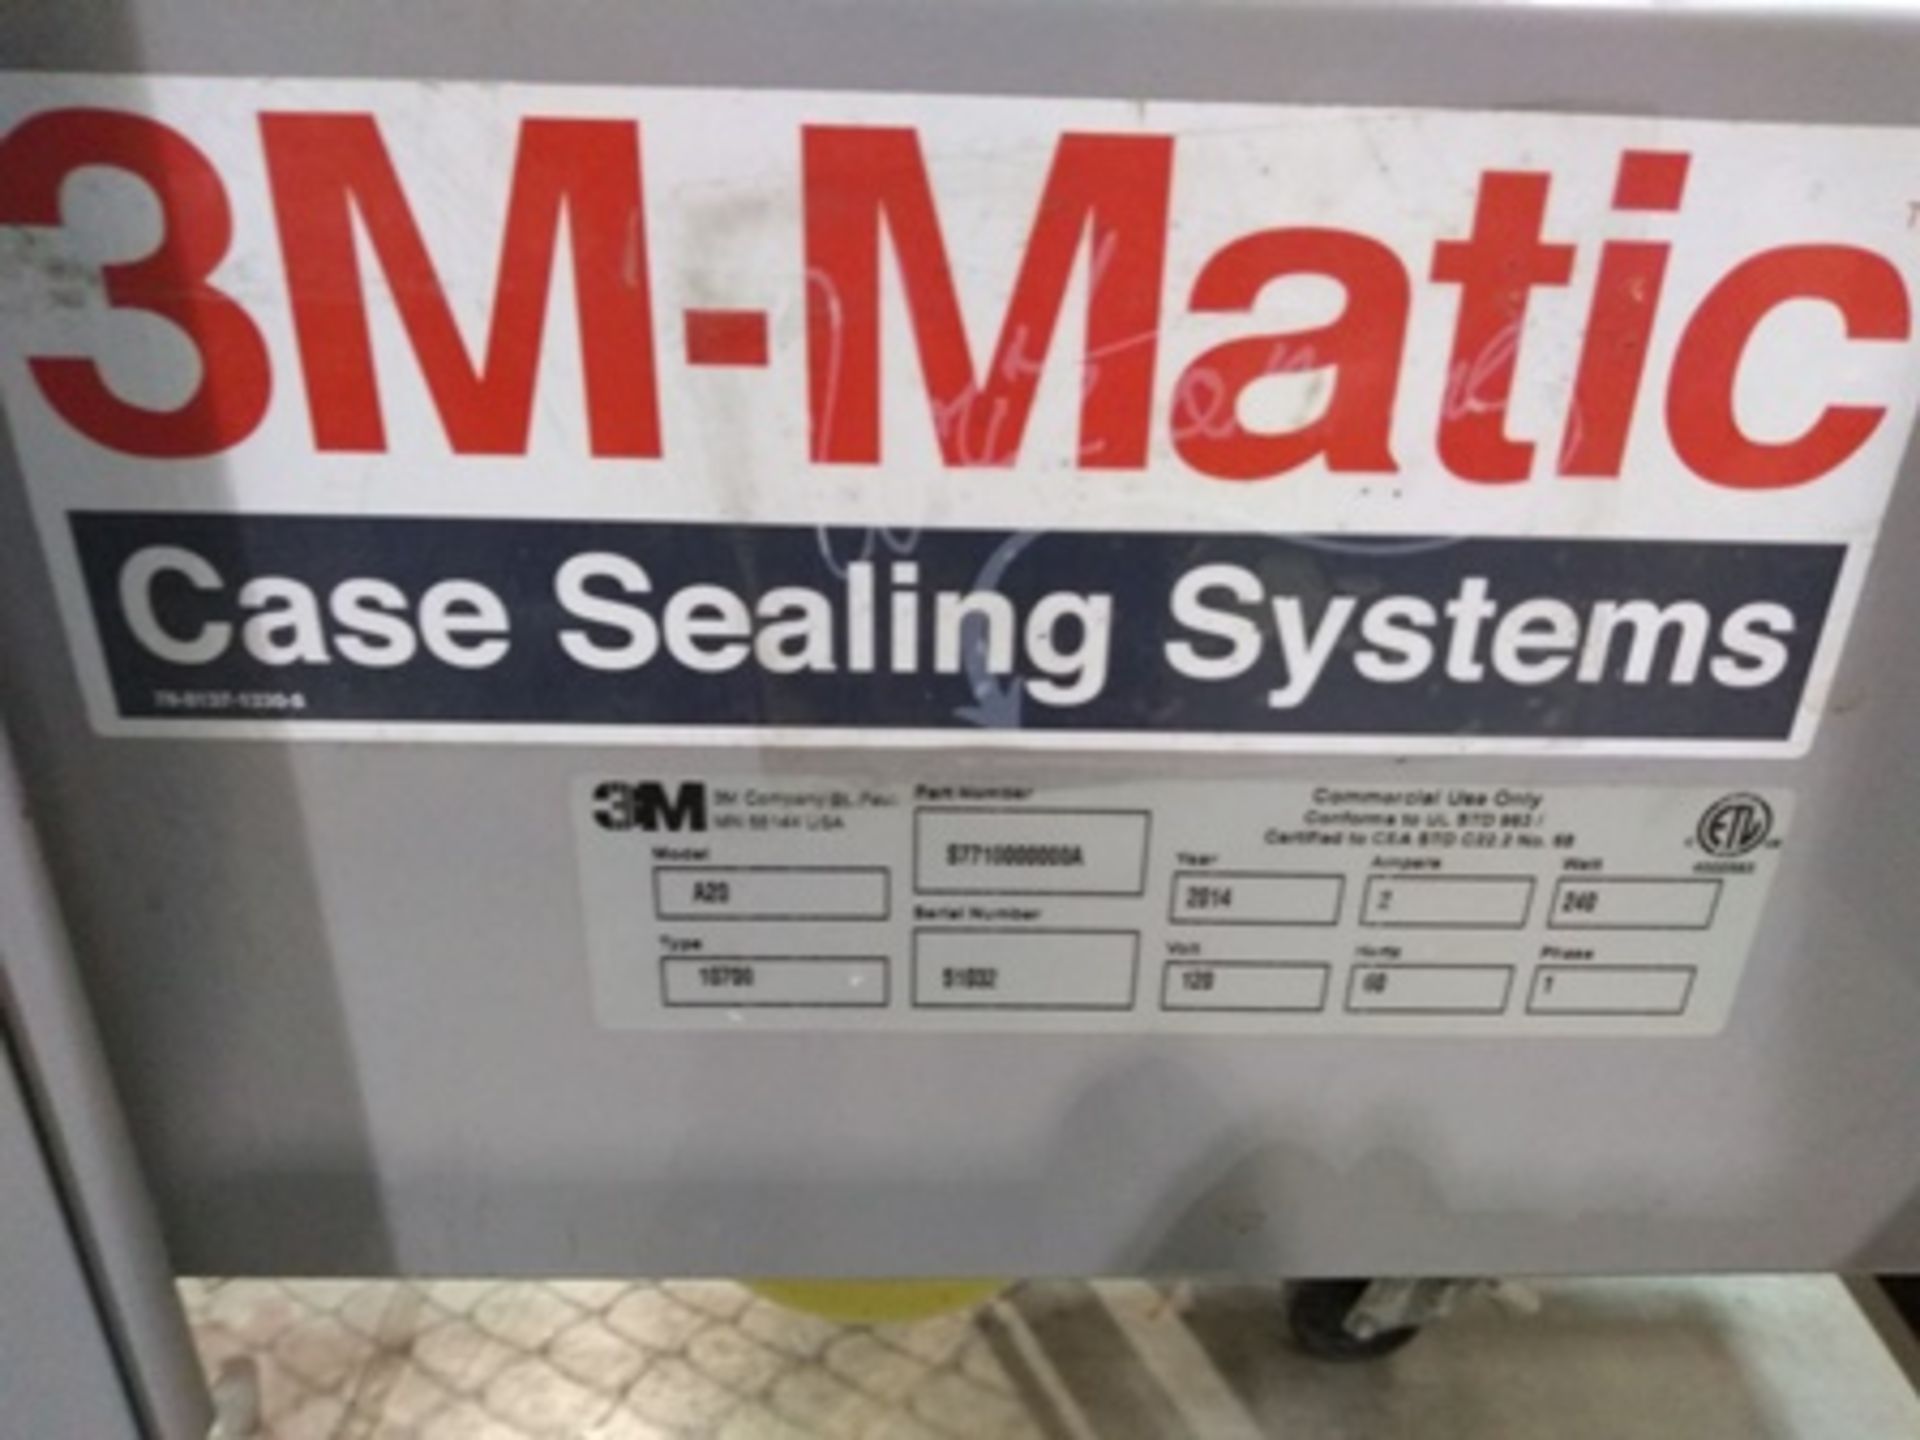 3M-Matic Case Sealing Systems, carton sealing machine mod. A20, serial number 51032, year 2014 … - Image 8 of 18